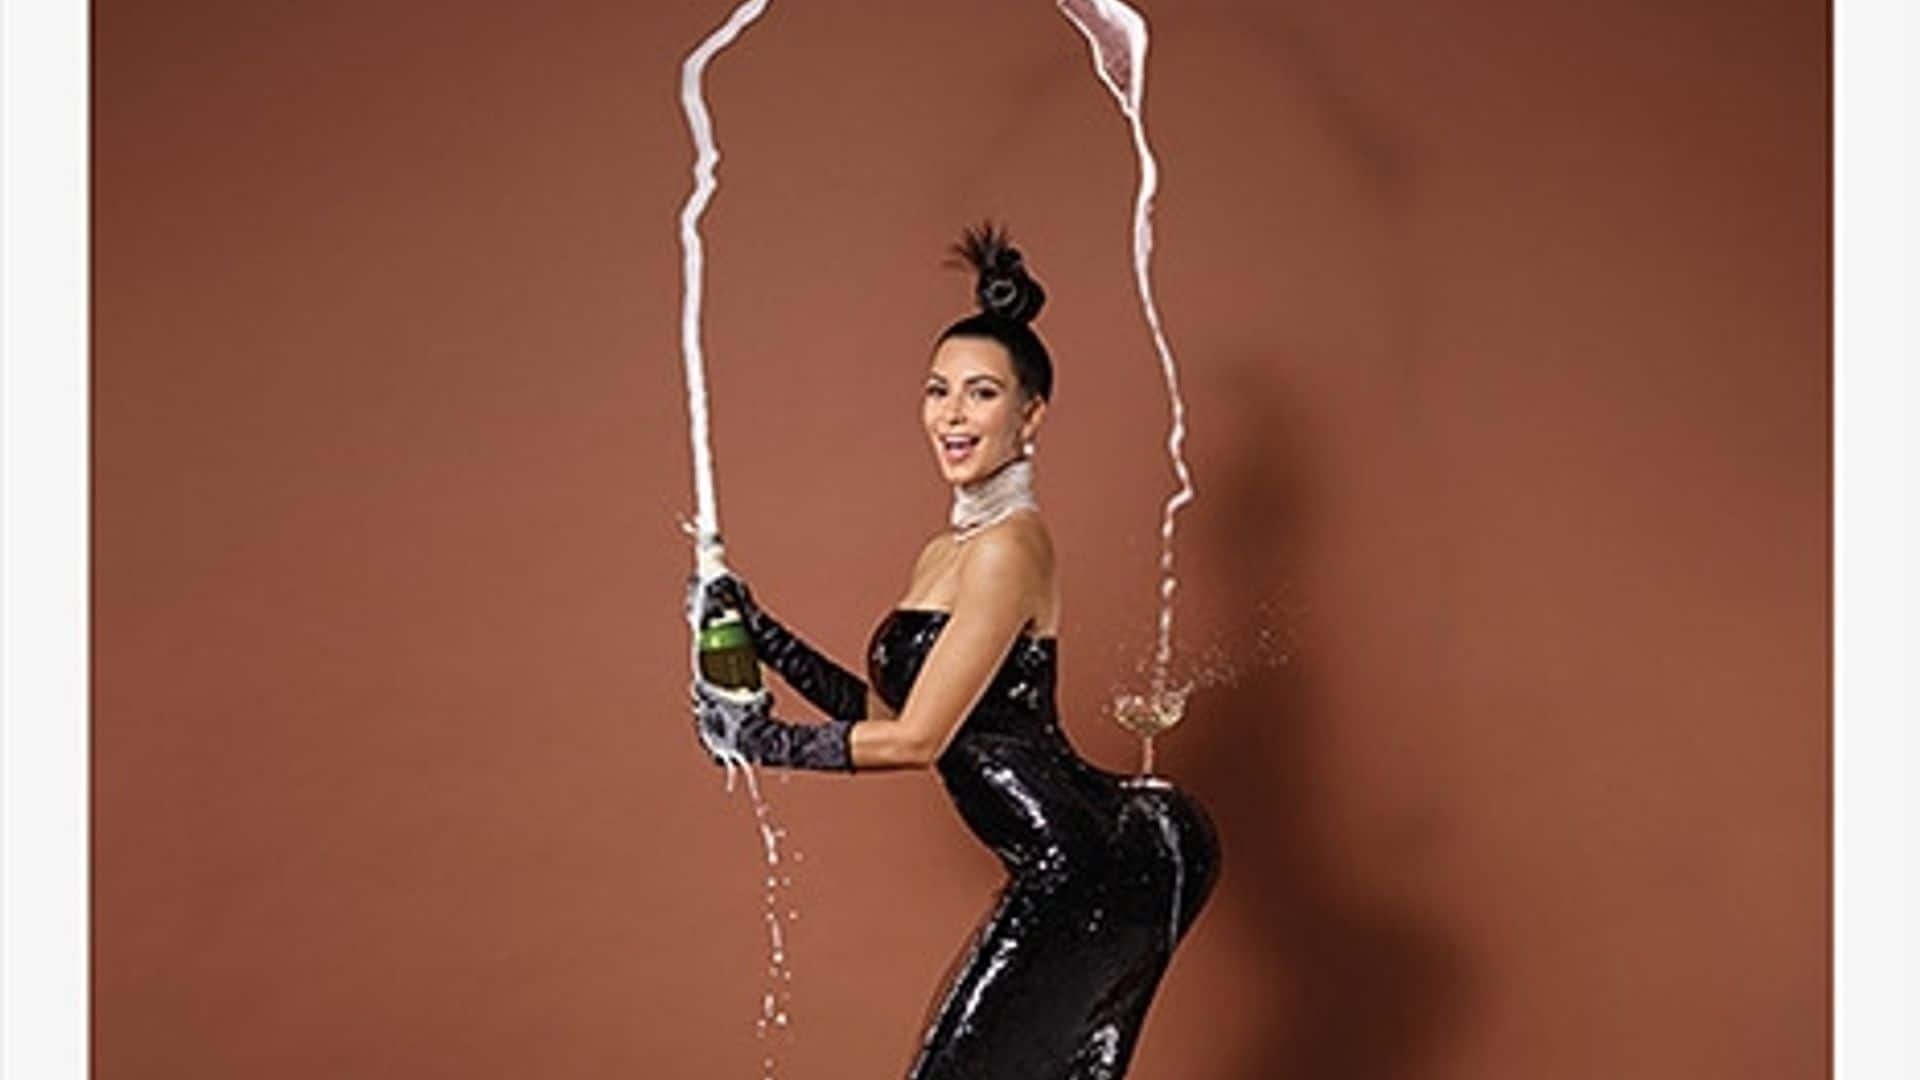 Kim replicated the famous photo "Champagne Incident"